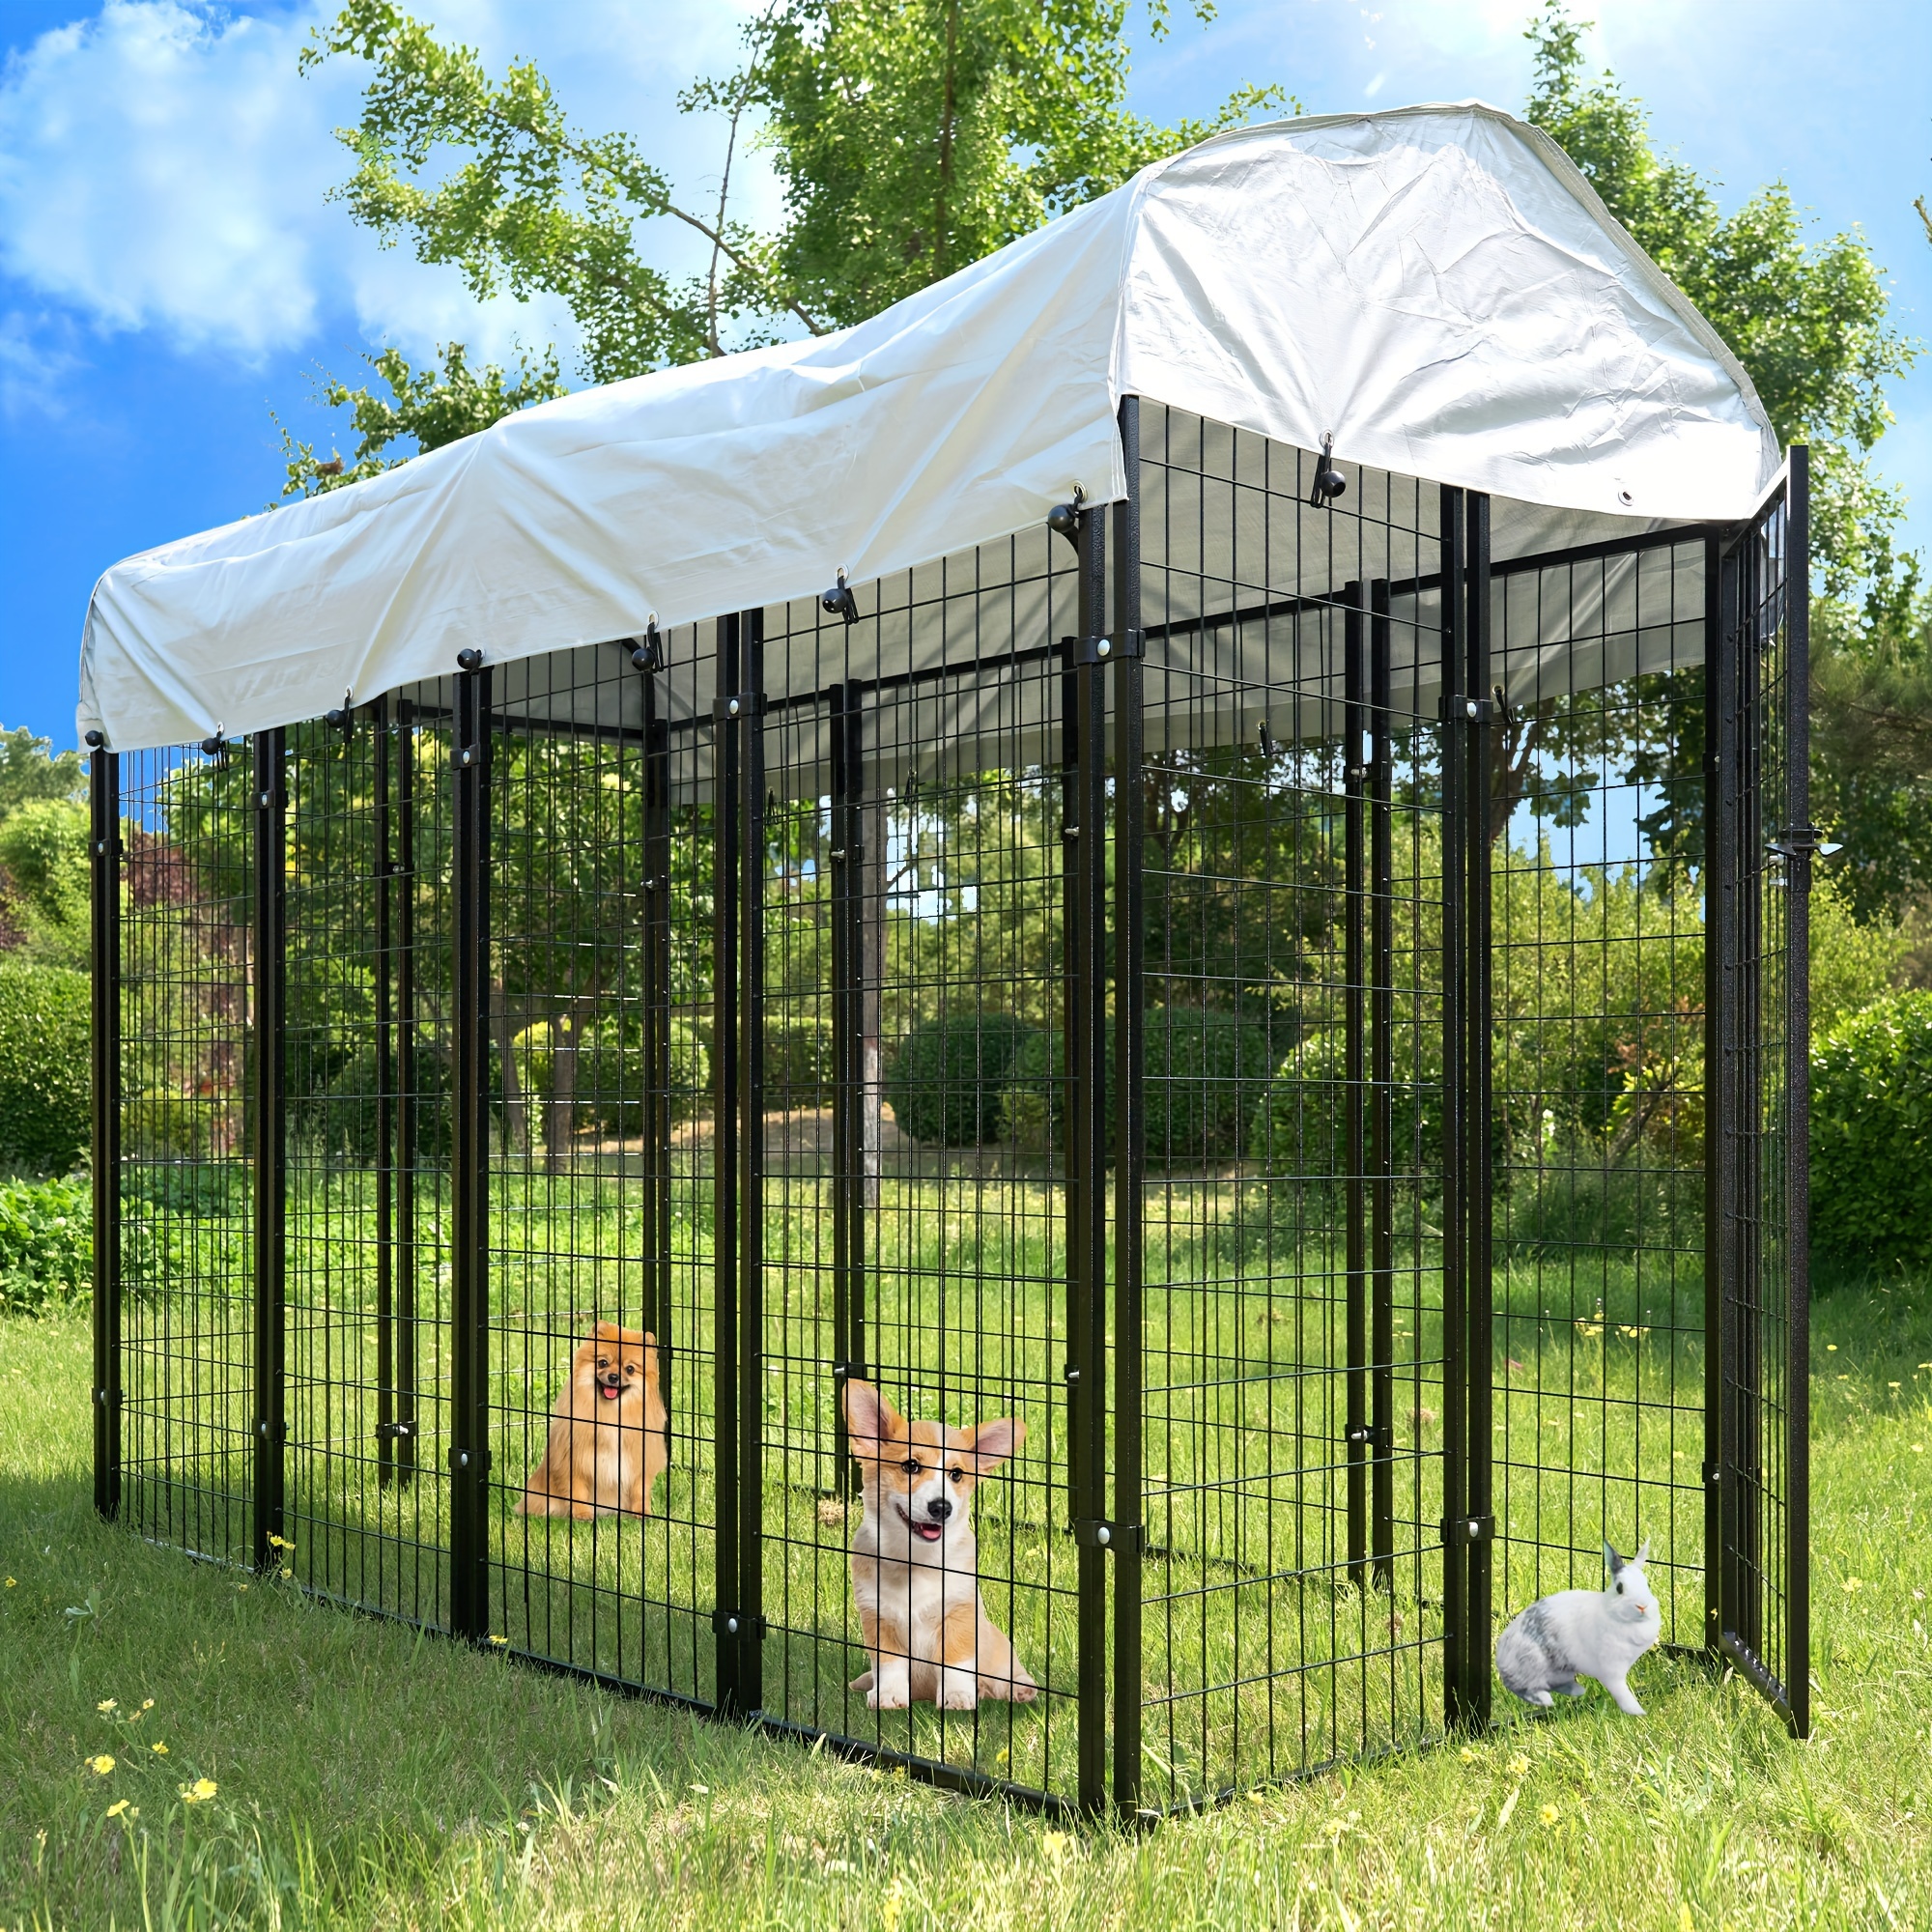 

Hittite Large Outdoor Dog Kennel Heavy Duty Outdoor Dog Cage, Anti - Rust Dog Pens Outdoor With Waterproof Uv-resistant Cover And Secure Lock For Backyard 8' L X4' W X 6' H